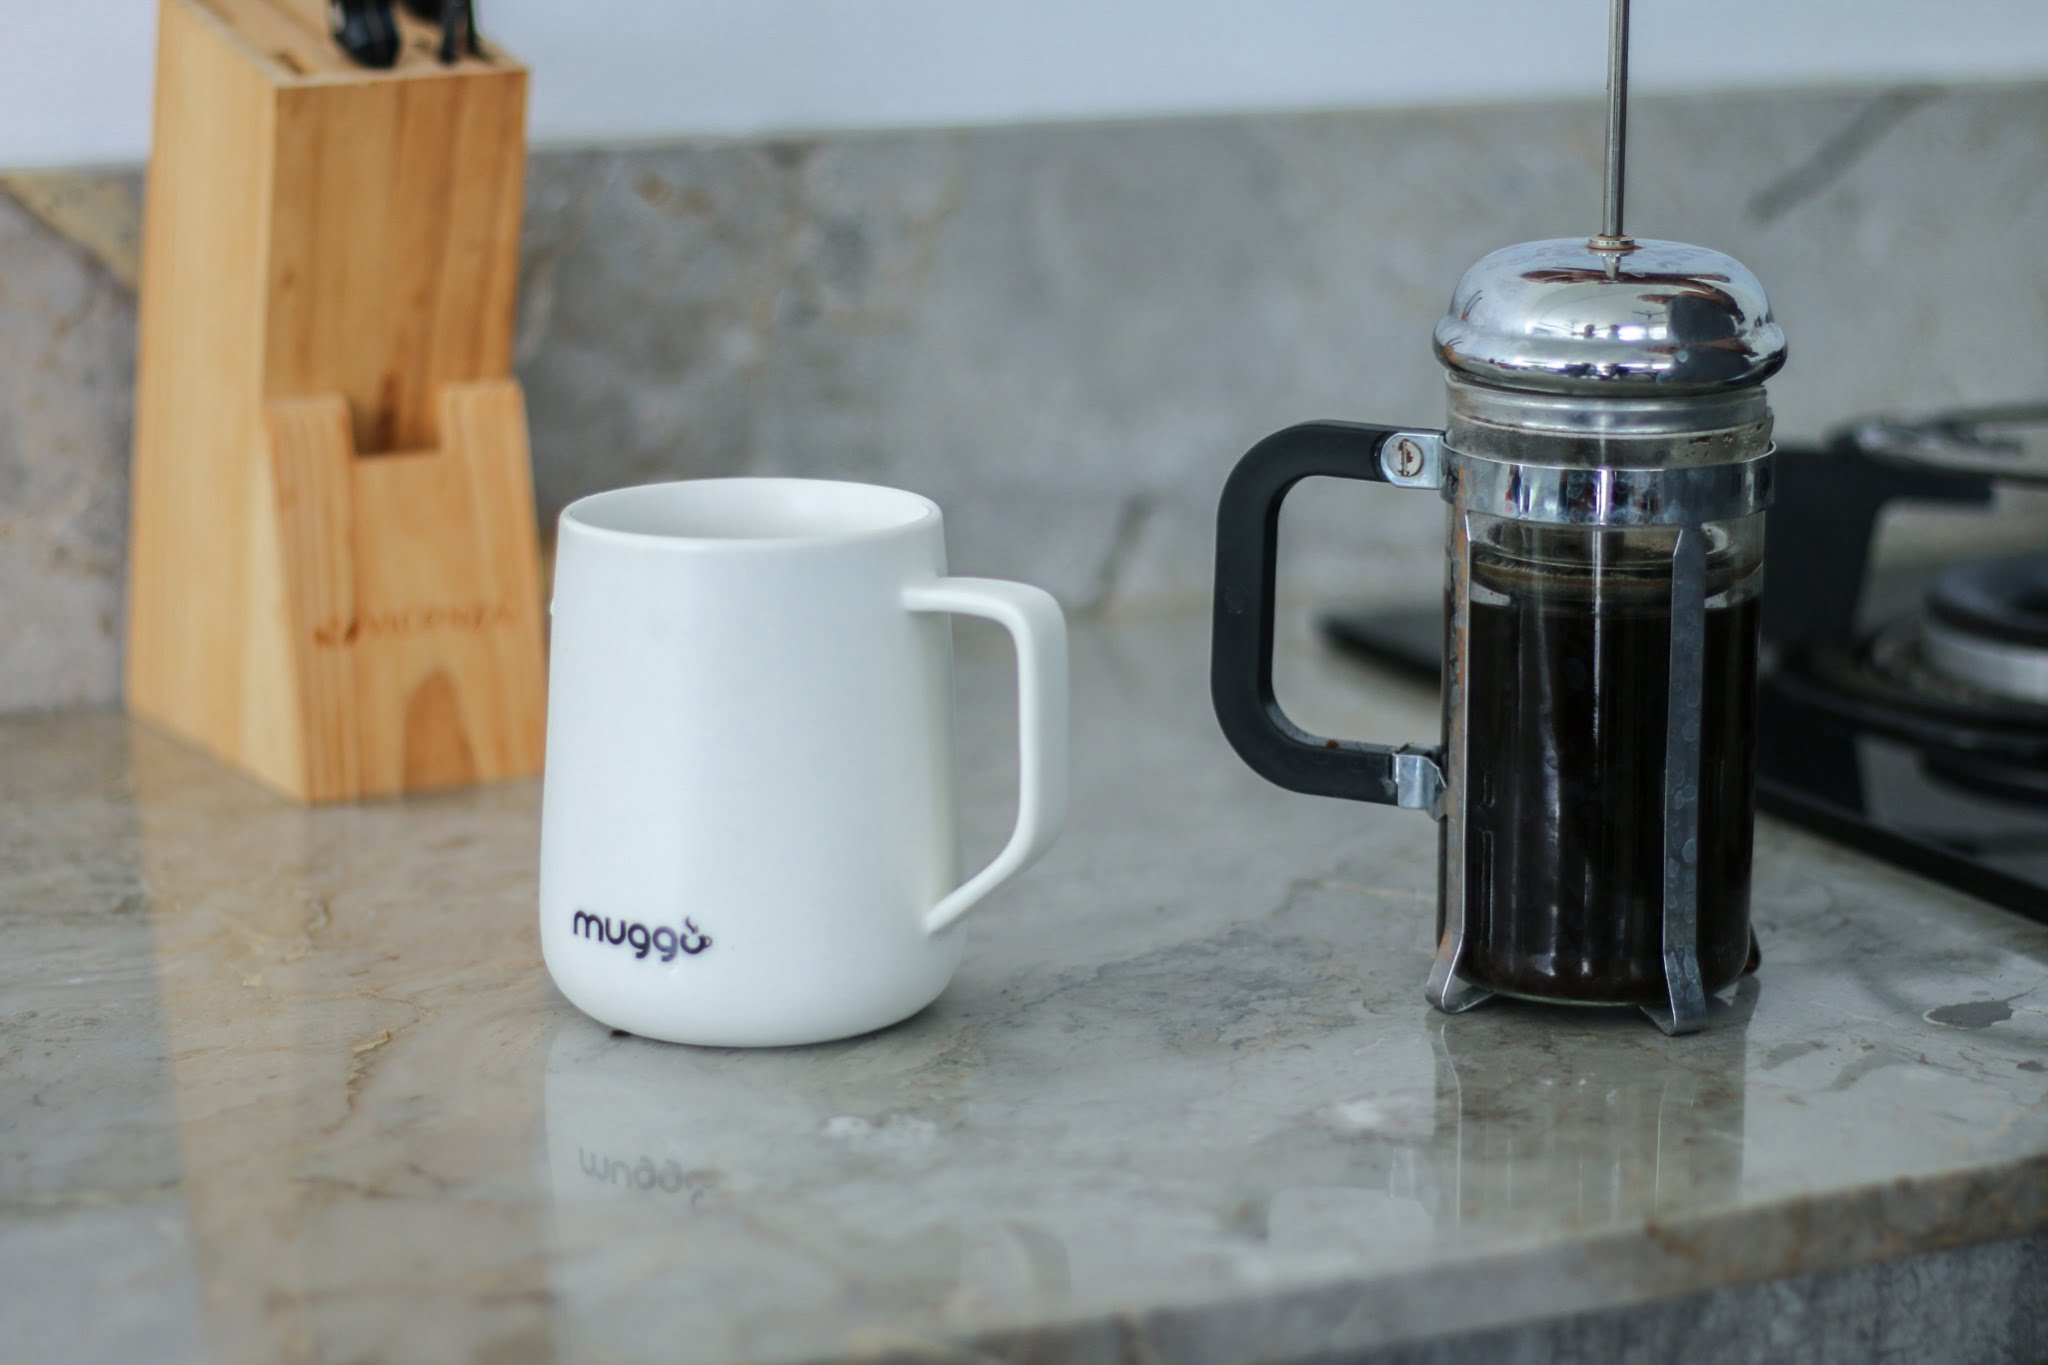 Brew low cost coffee with Muggo